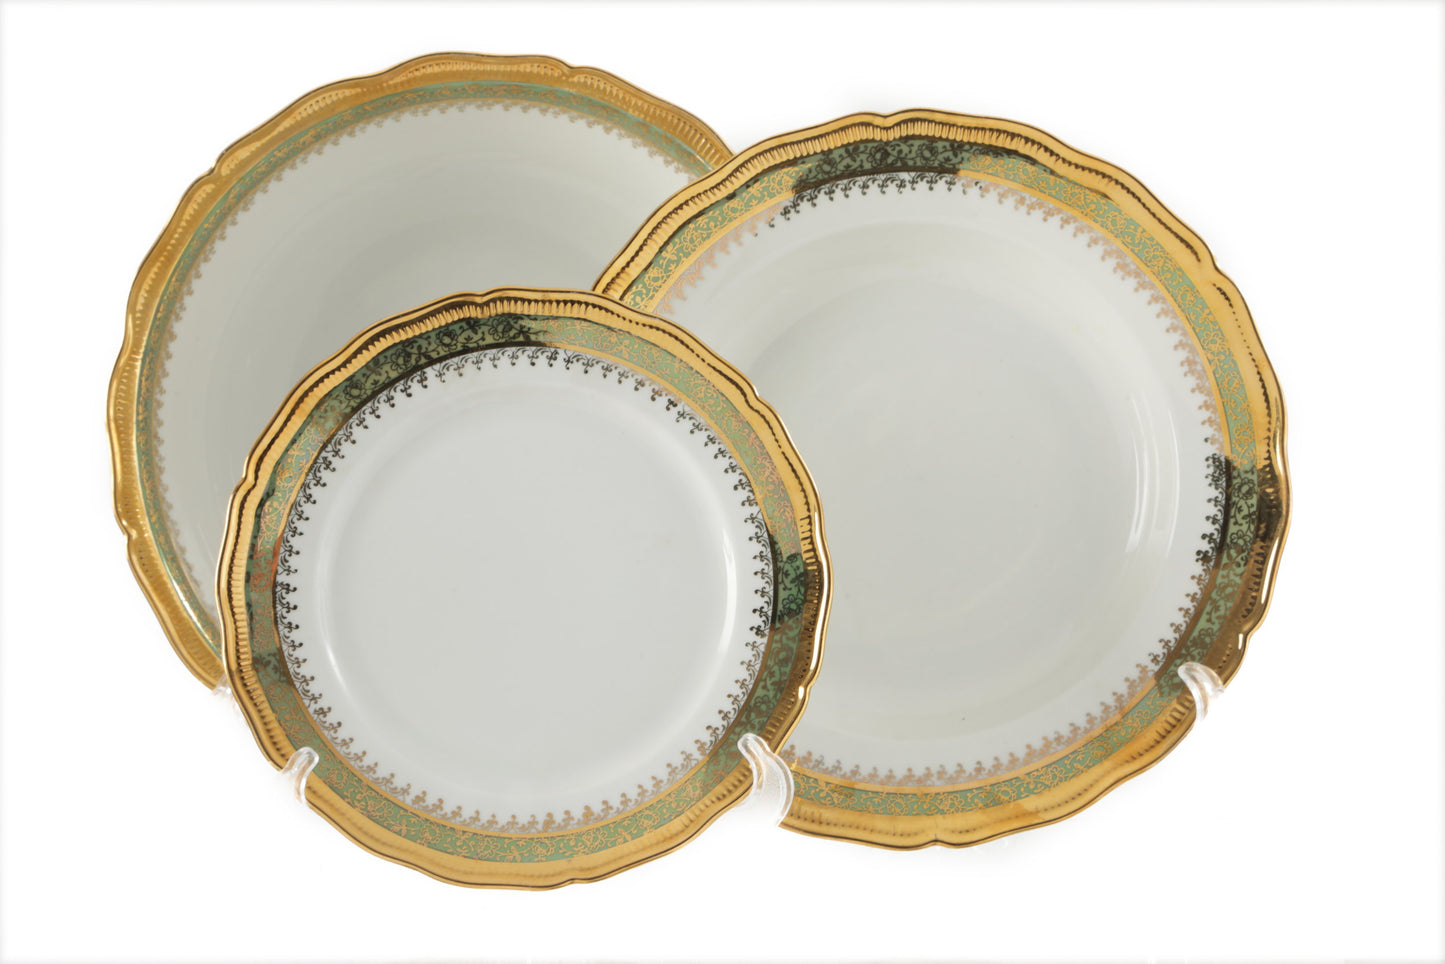 Seltmann "Renate" dinner set with green and gold border, 1960s